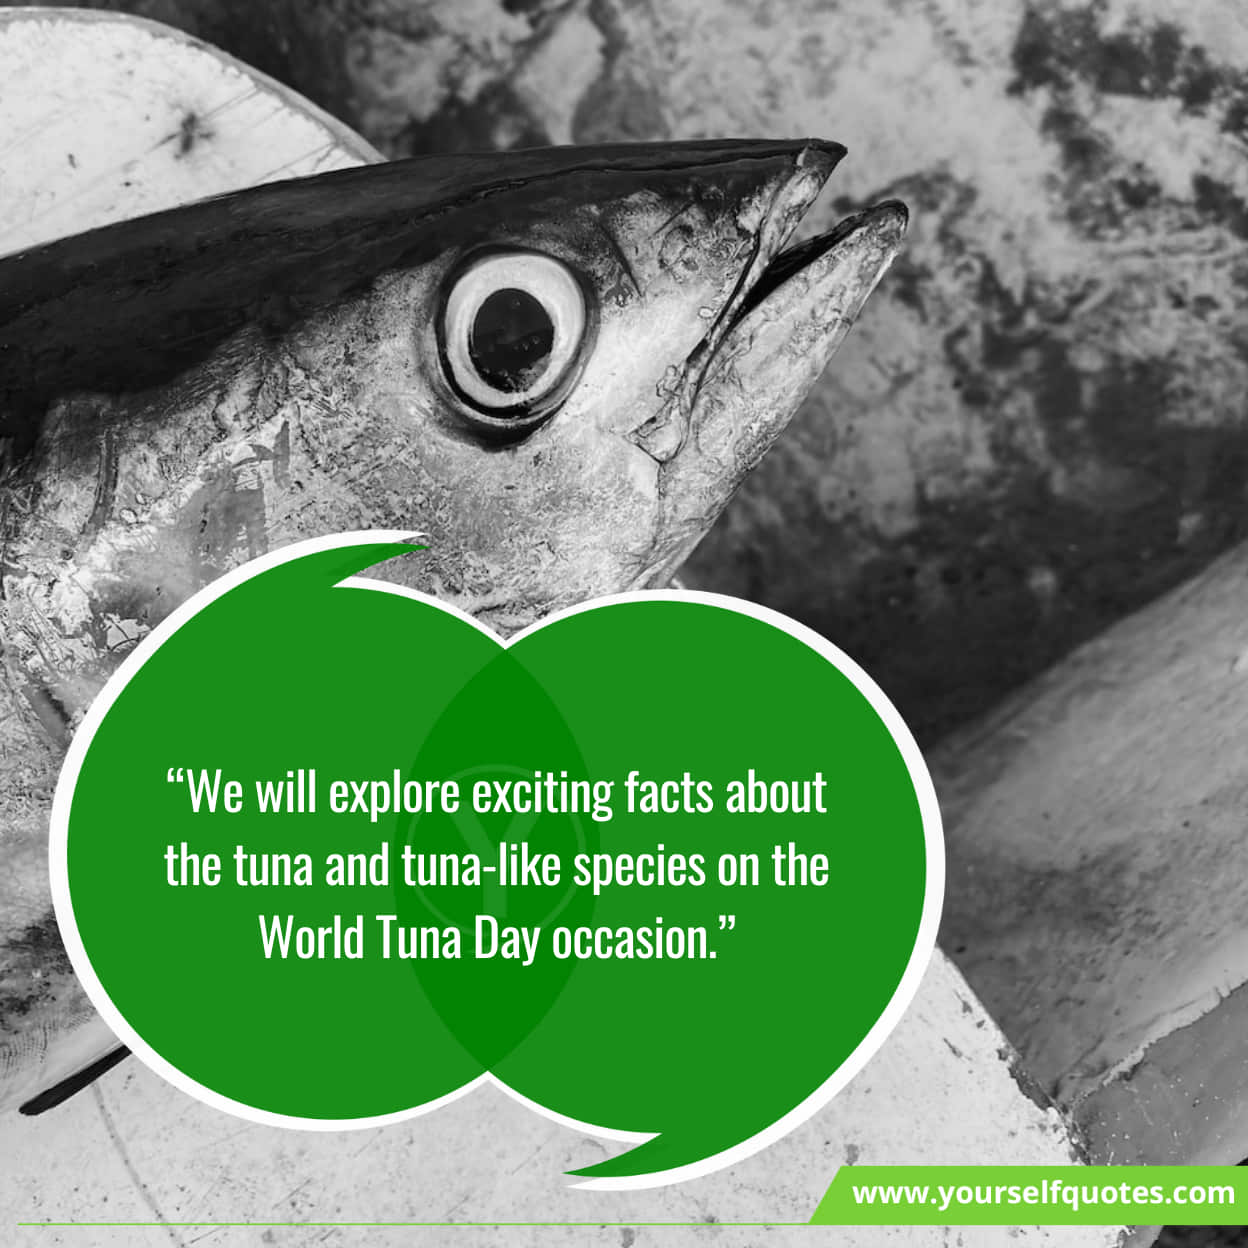 Messages on sustainable fishing practices for World Tuna Day